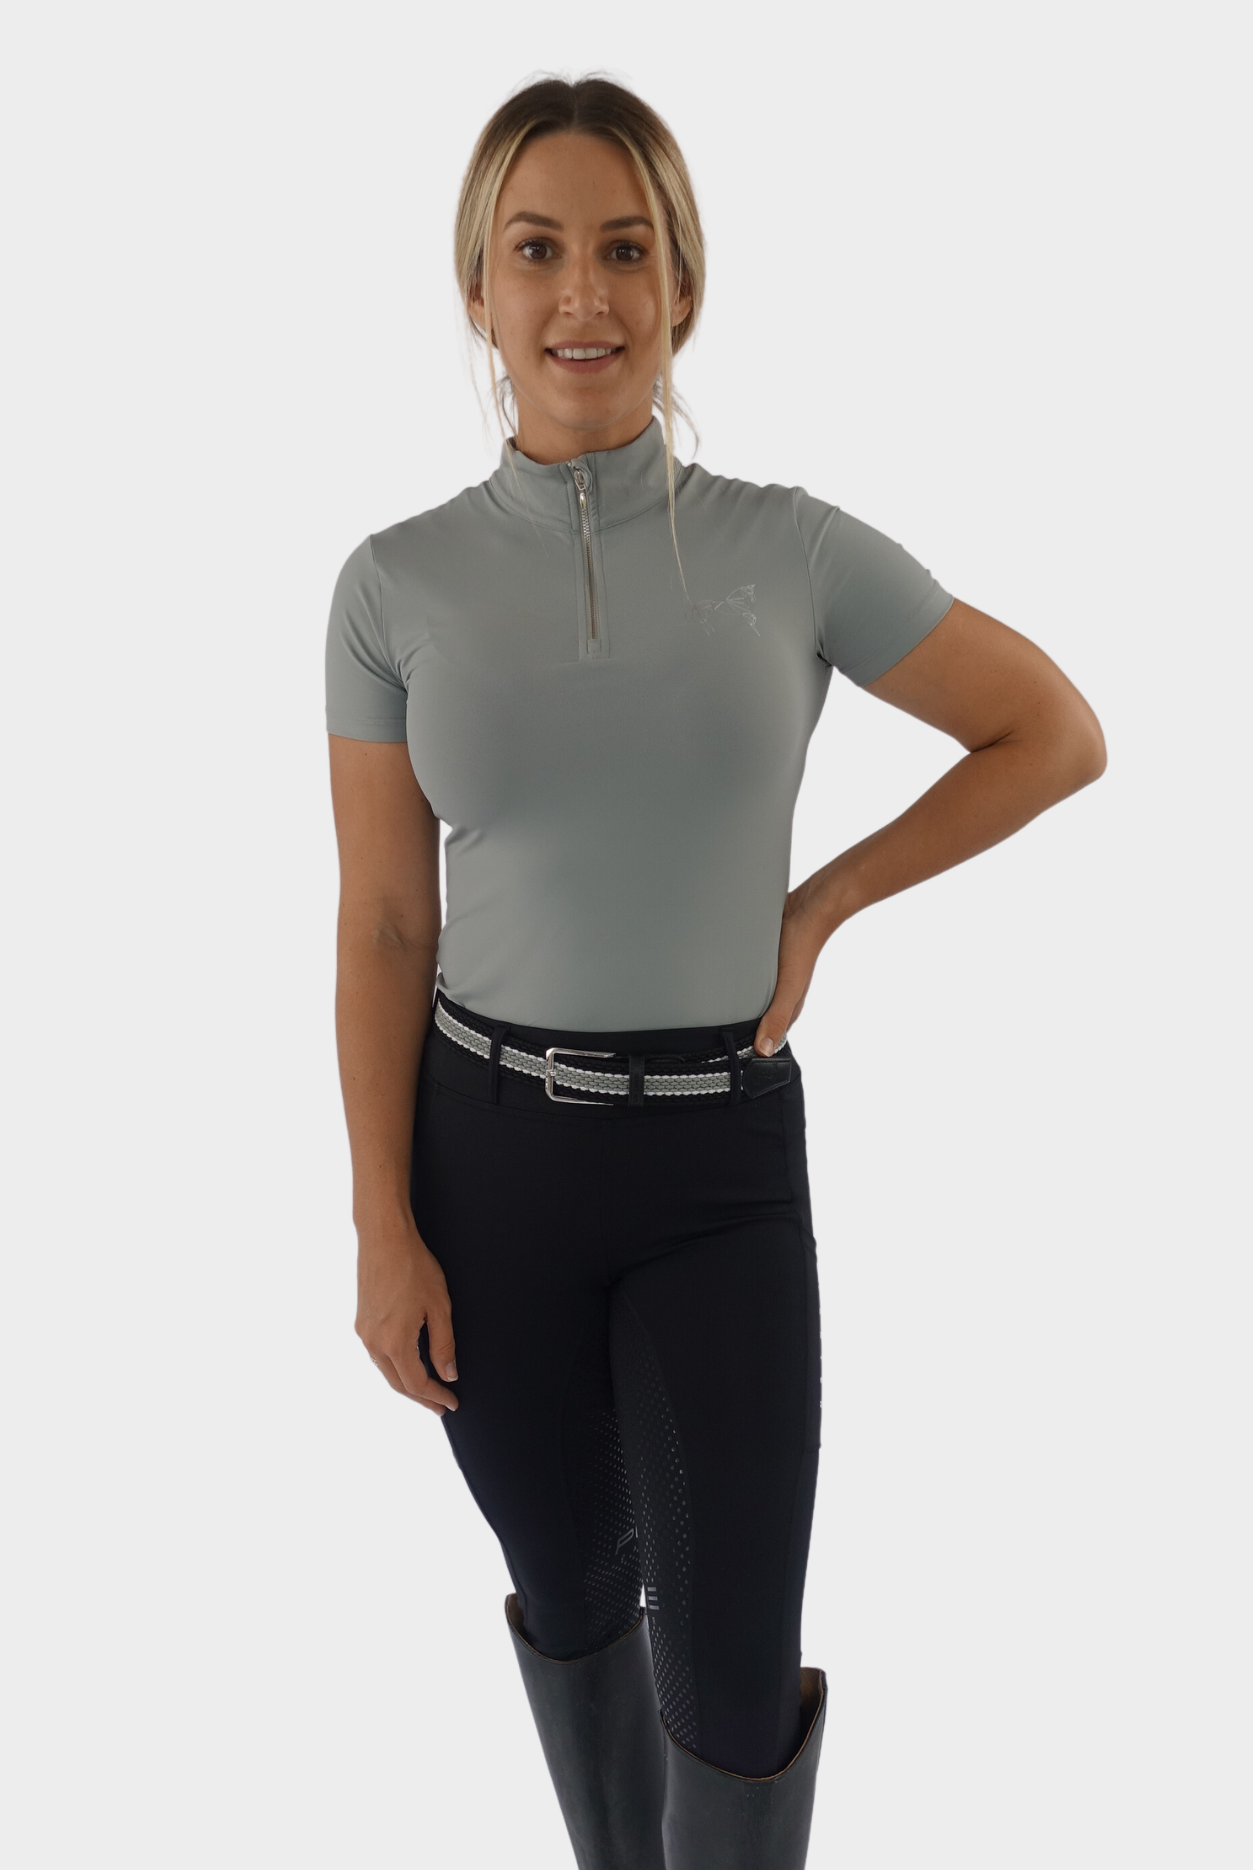 Lightweight and stretchy equestrian base layer with flatlock seams, ensuring freedom of movement and reducing friction.